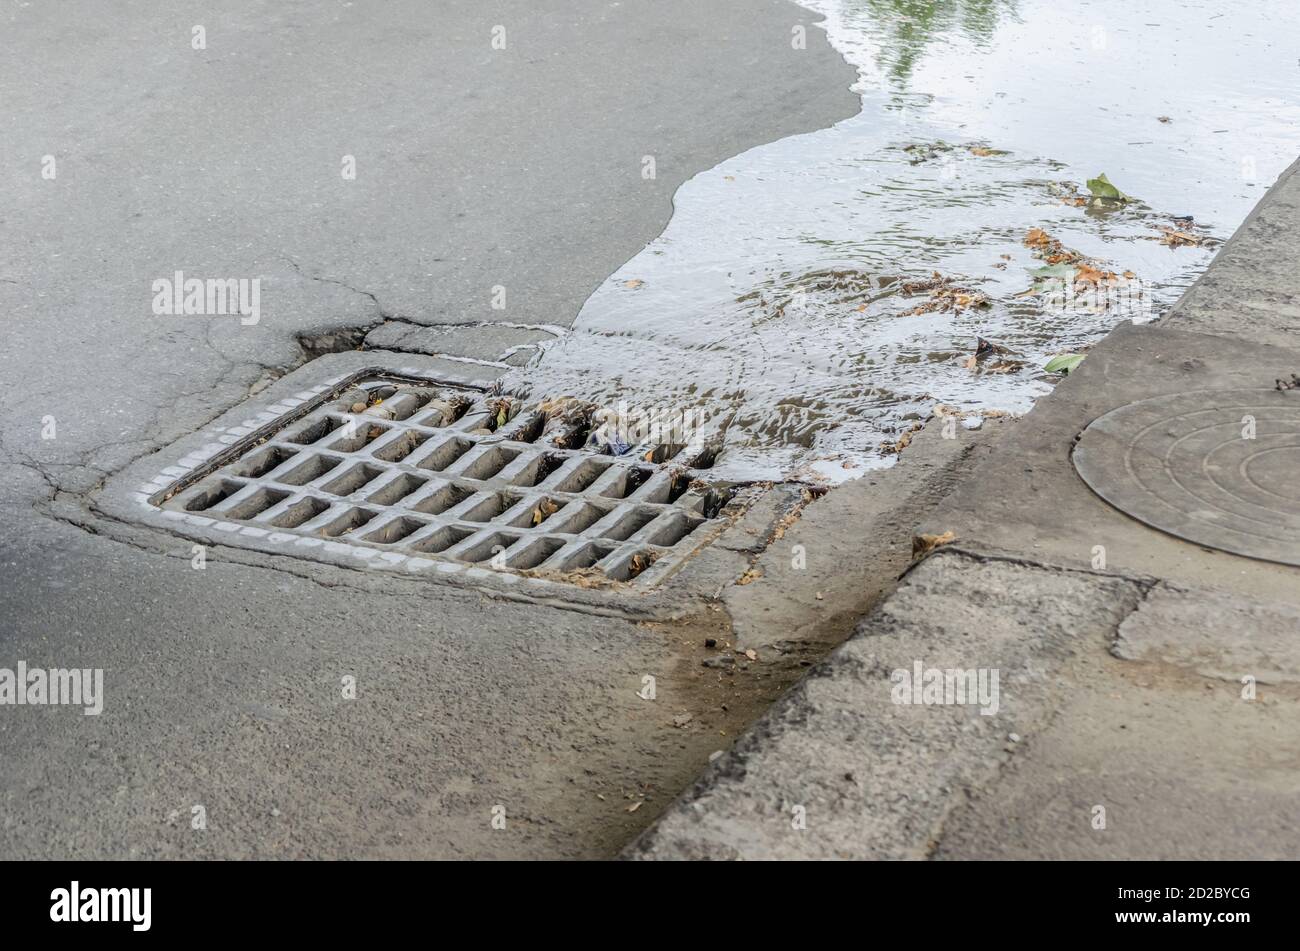 Water drains into a storm drain on the road close-up Stock Photo